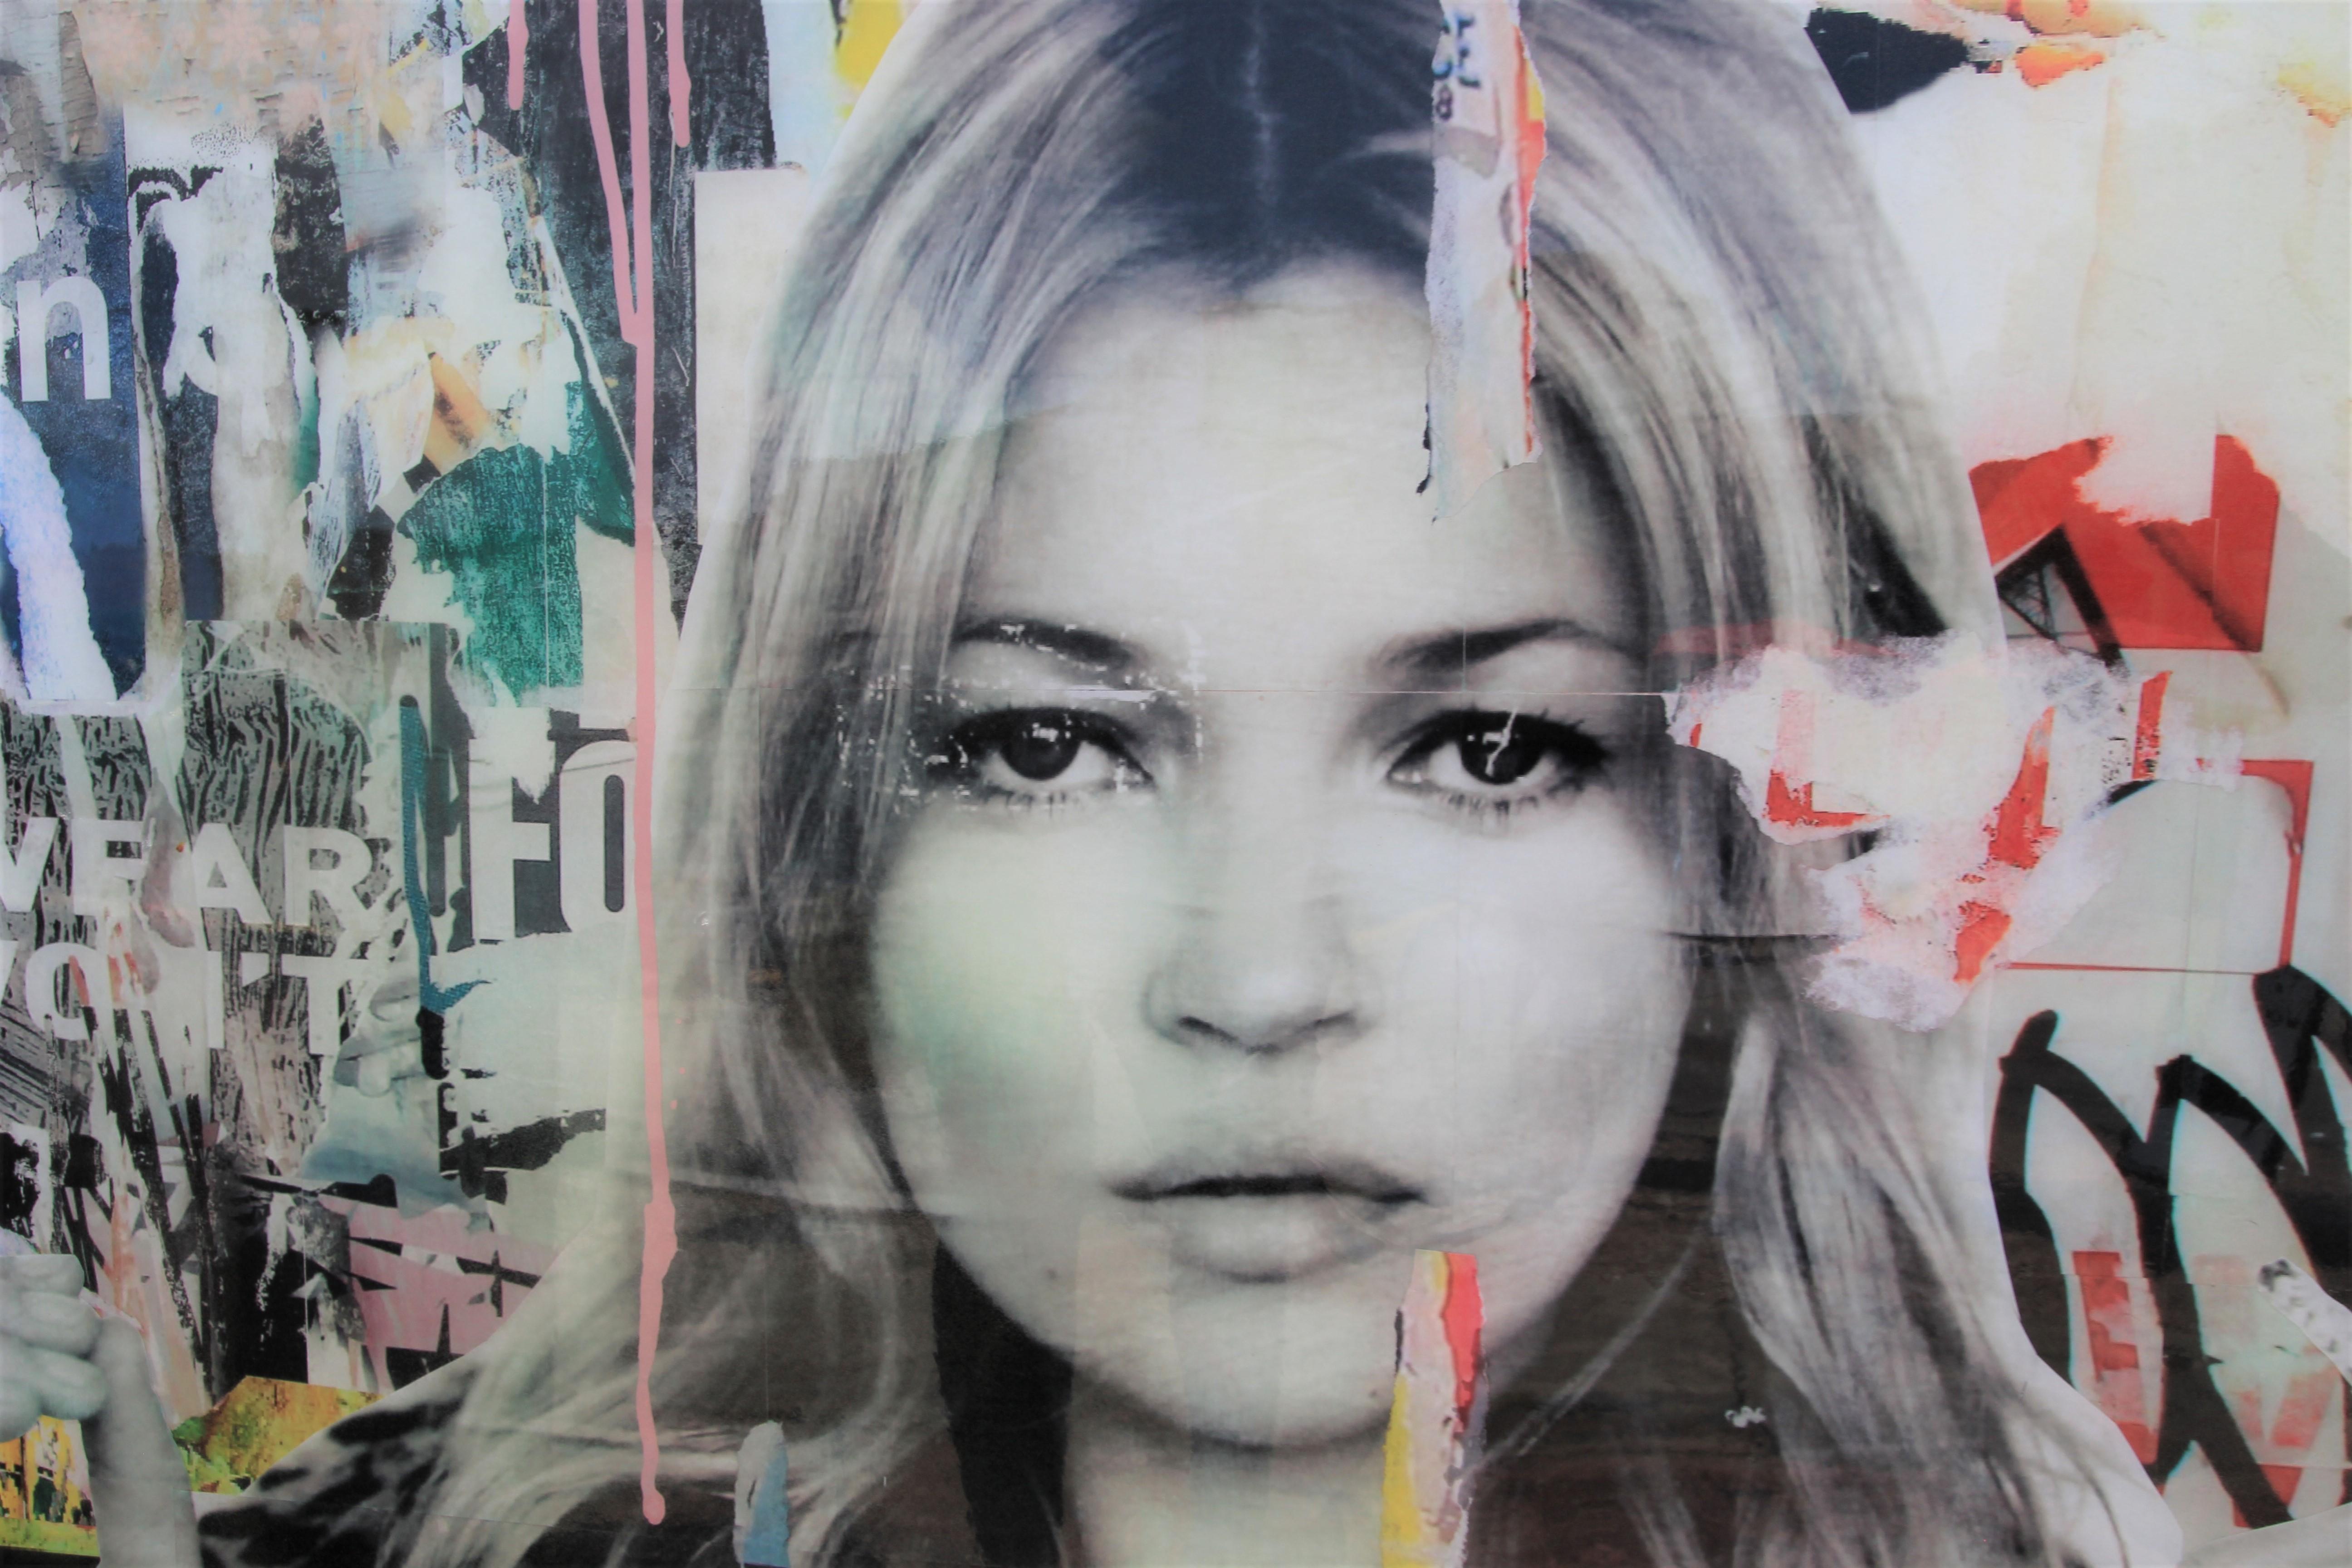 “Pair of Kates” Colorful Contemporary Mixed Media Pop Art Collage of Kate Moss 1